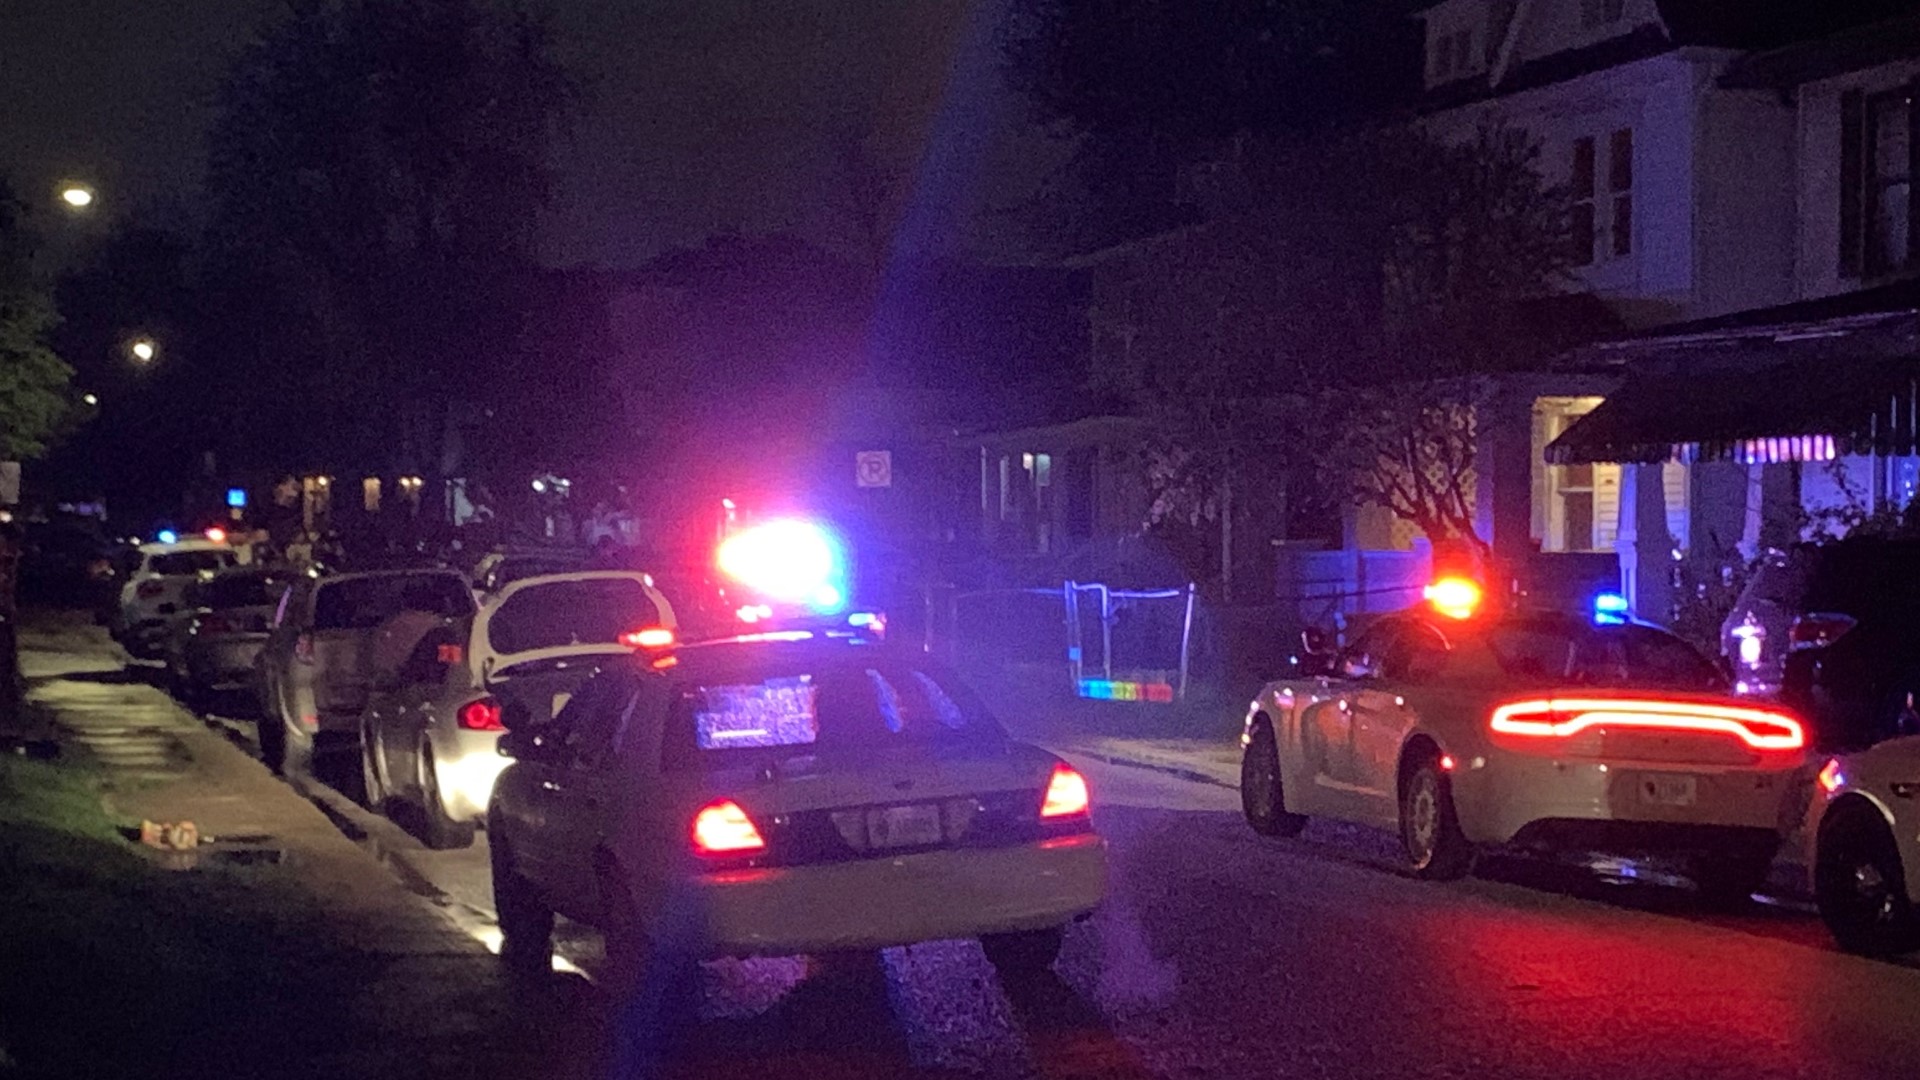 A man found shot on Gray Street on Indy's east side early Monday died at the hospital.